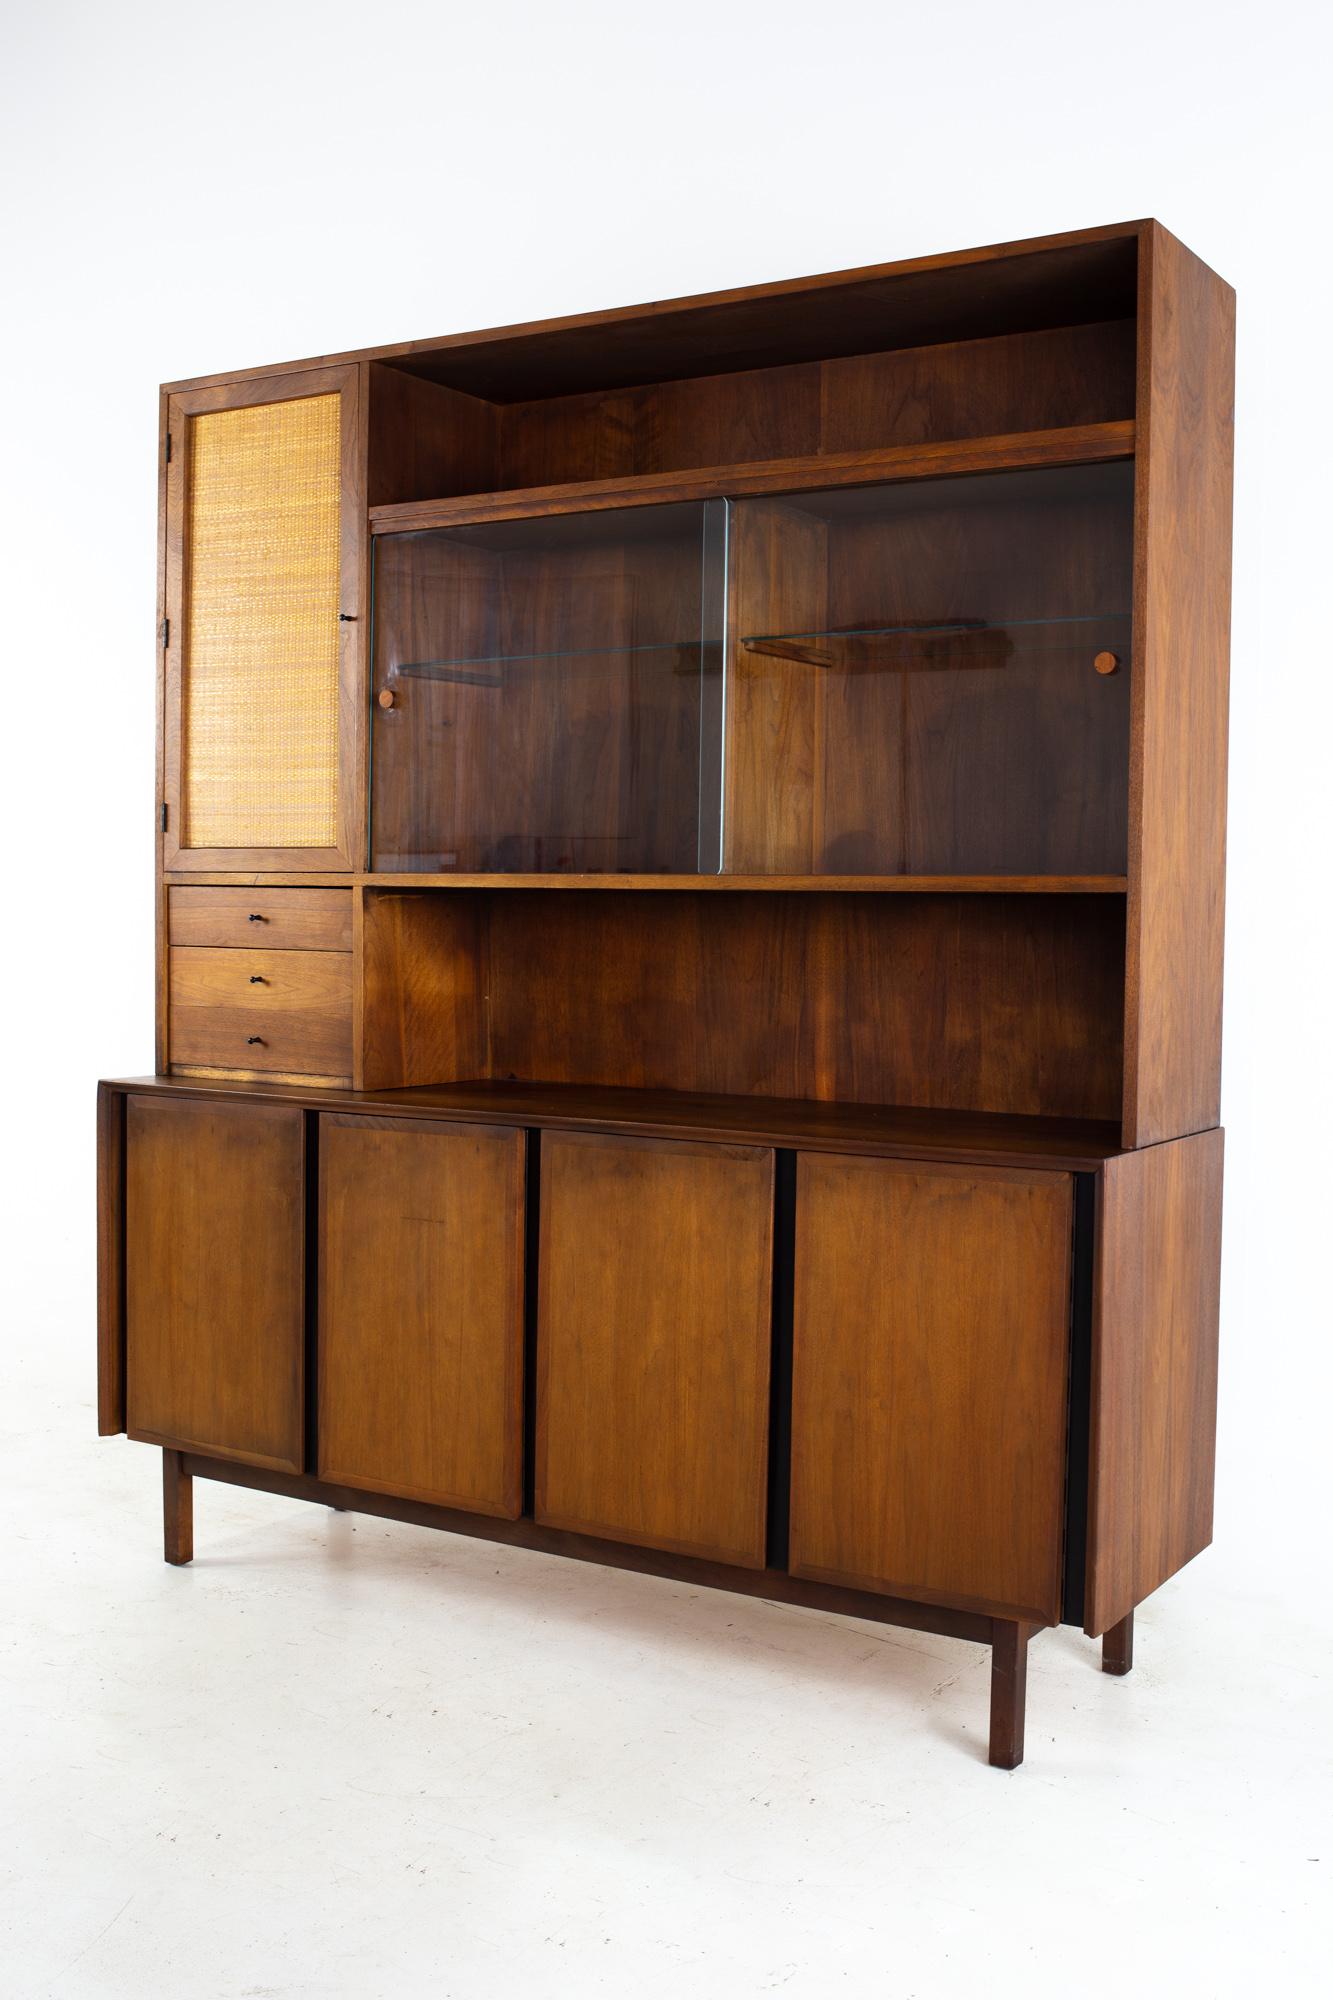 Dillingham mid century walnut and cane sideboard credenza buffet and hutch
Buffet measures: 64 wide x 18 deep x 30 inches high
Credenza measures: 64 wide x 13 deep x 44 inches high

All pieces of furniture can be had in what we call restored